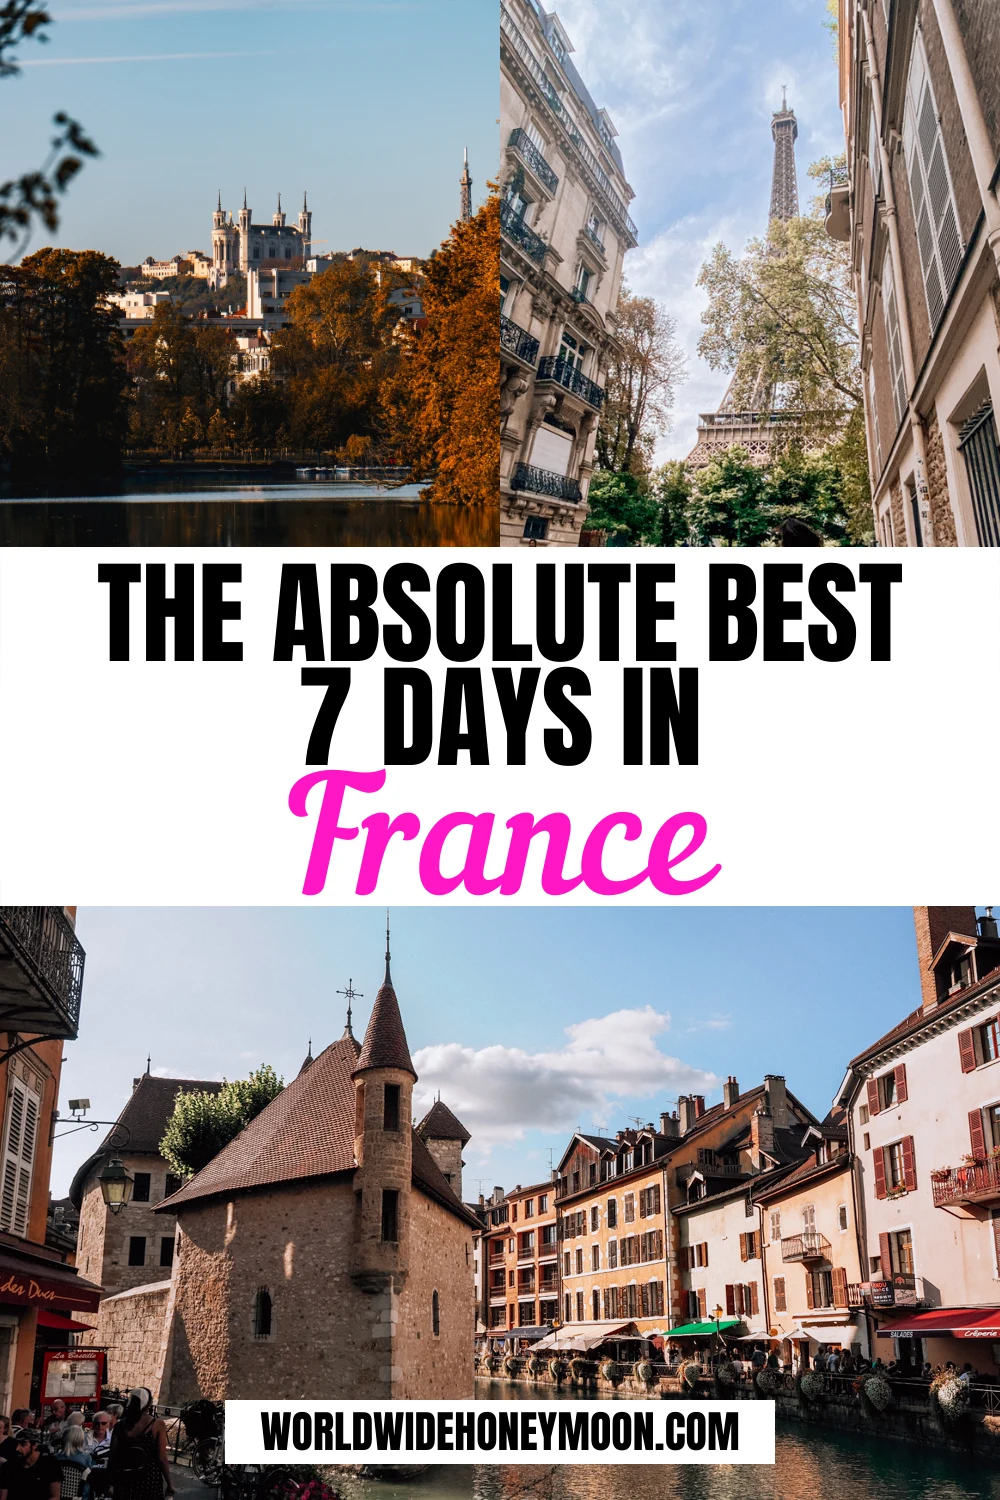 Absolute Best 7 Days in France